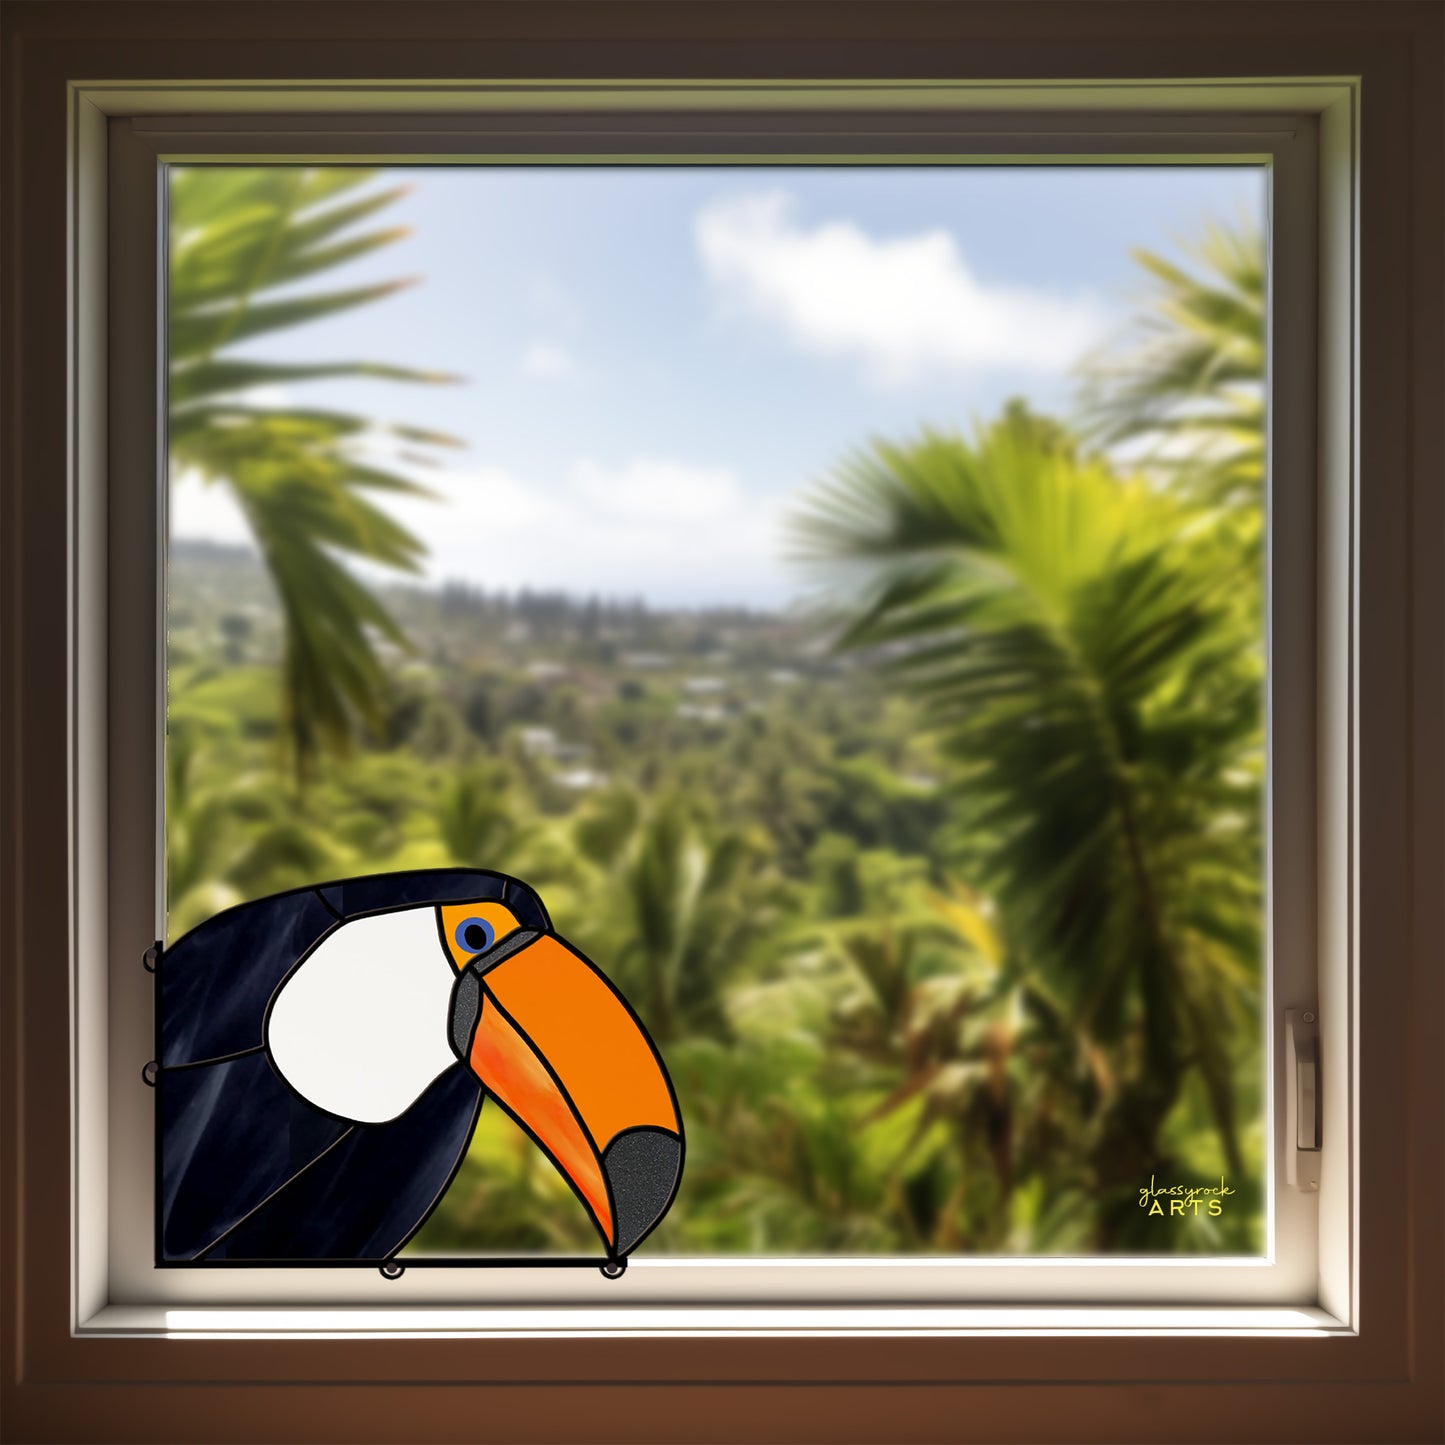 Toucan Stained Glass Bird Pattern